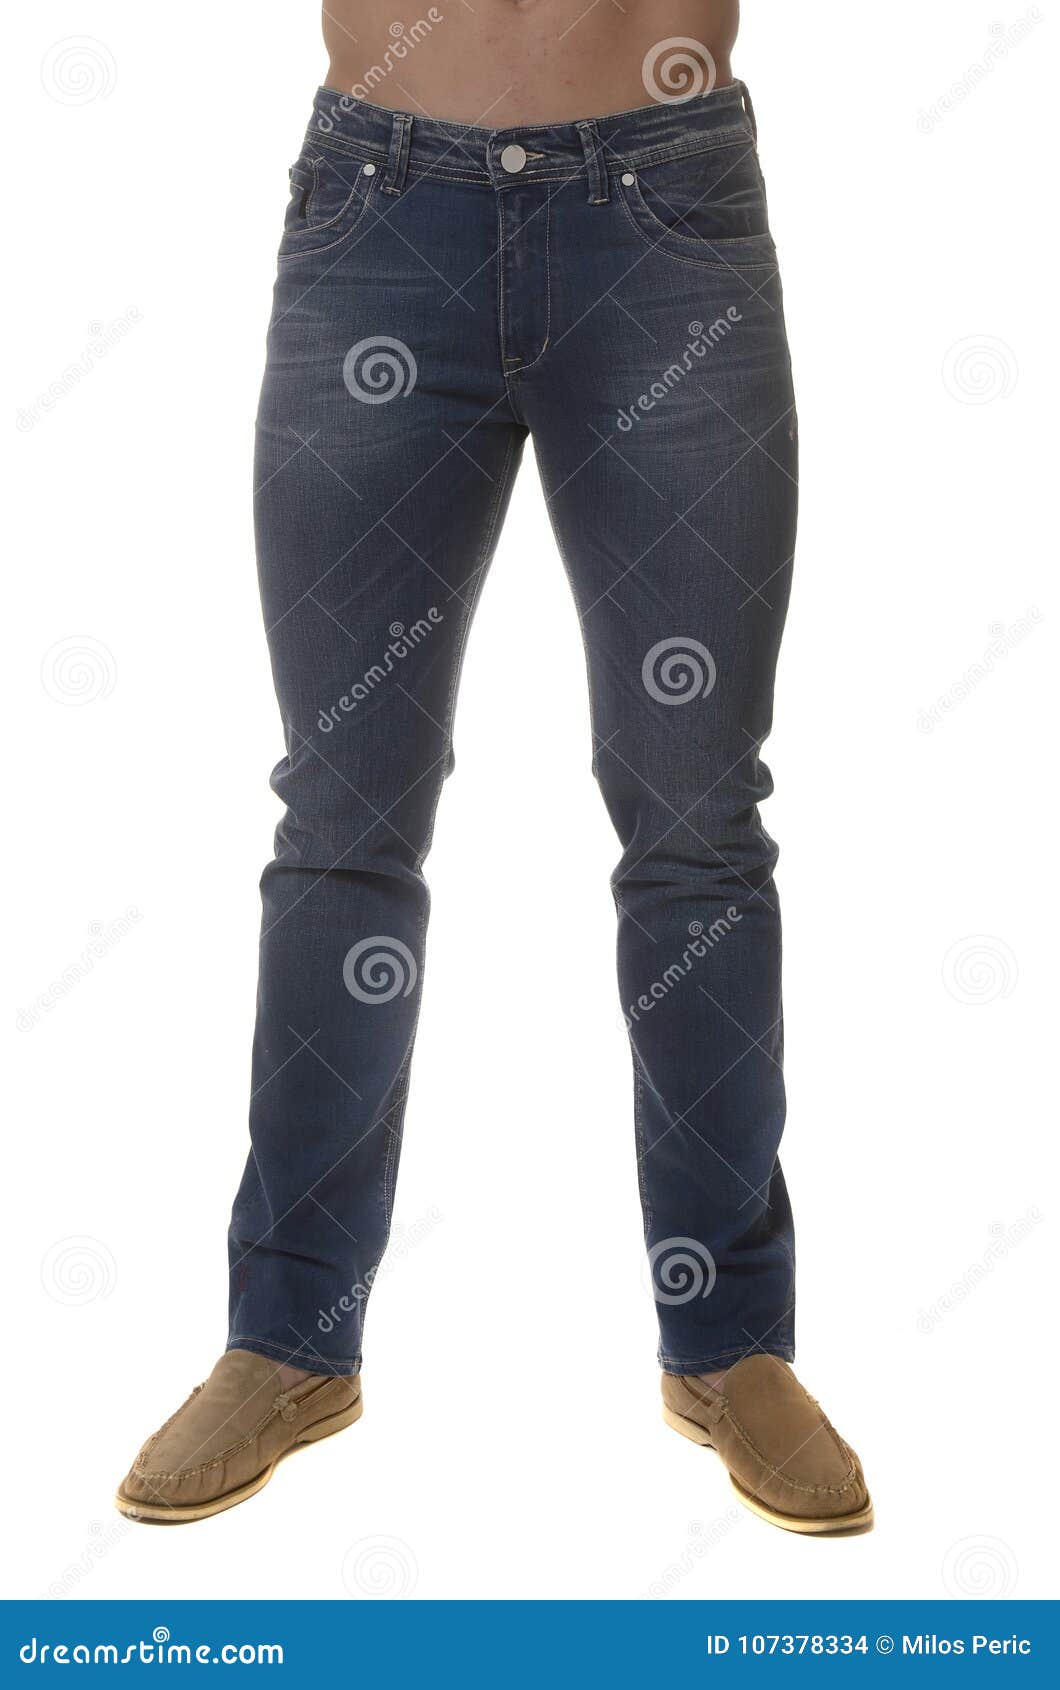 Men in jeans stock photo. Image of model, person, looking - 107378334